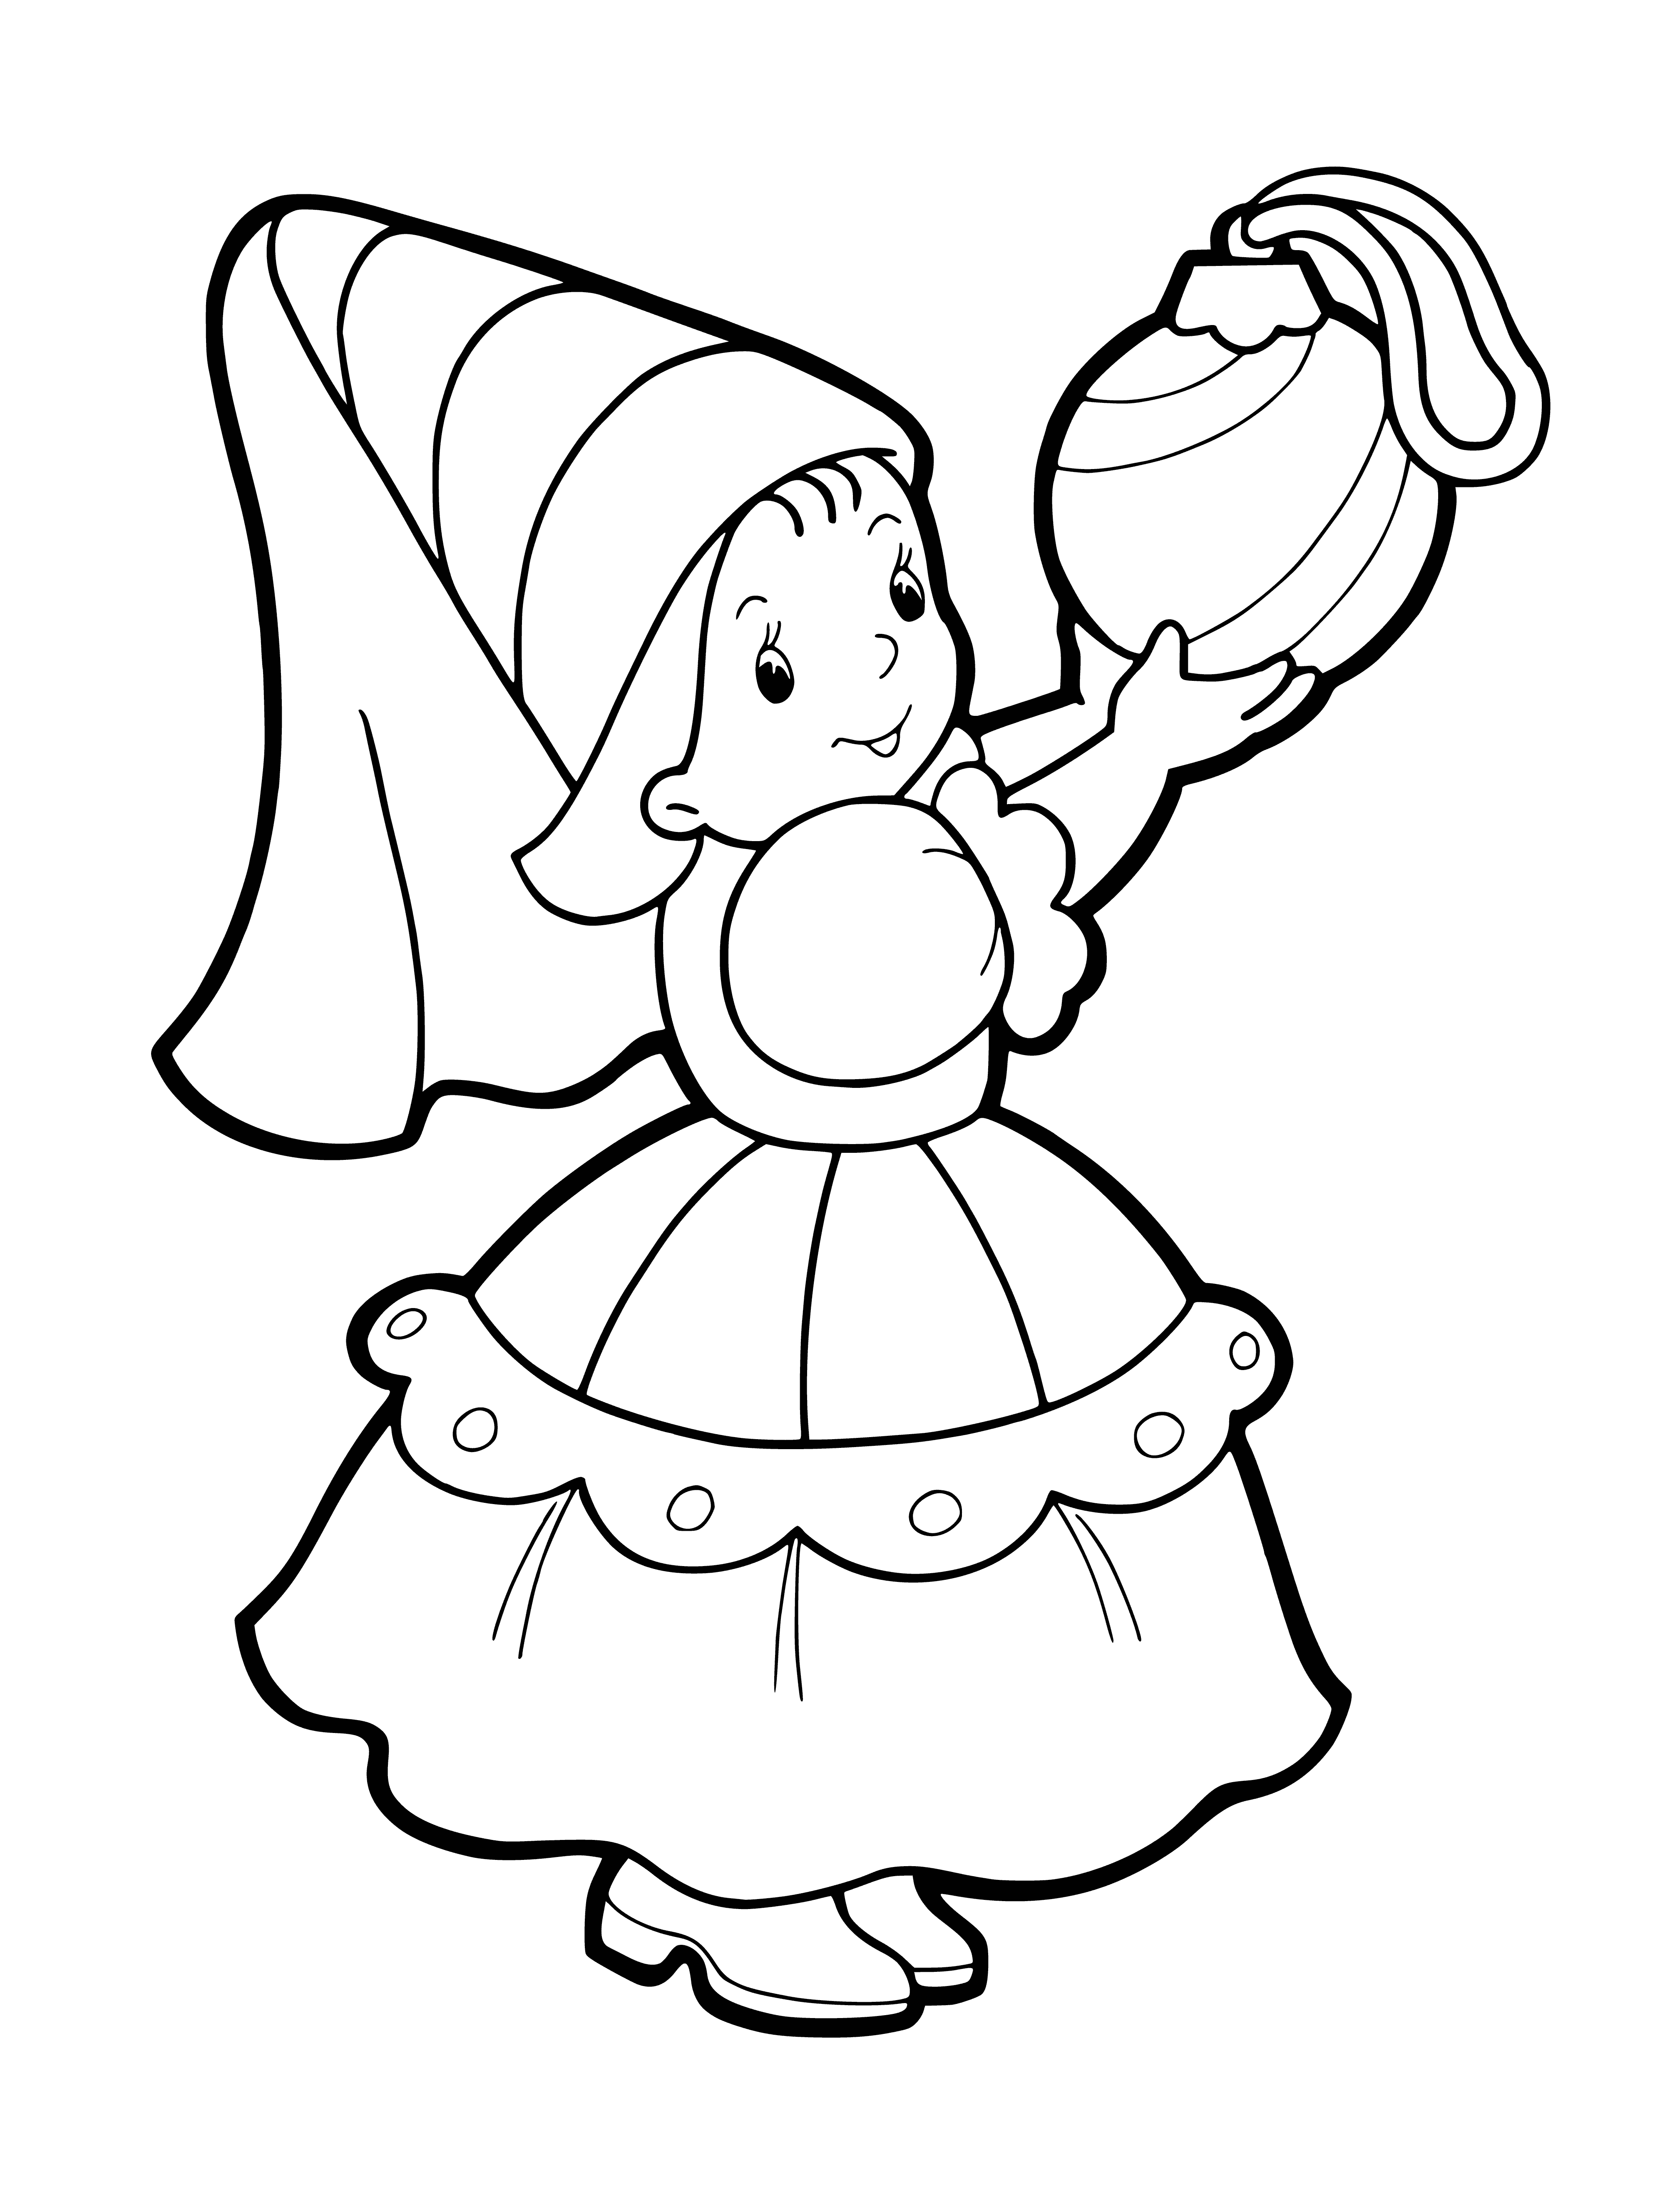 coloring page: Fairy girl flying around ball wearing pink dress w/ glittering wings. #Magical #Fairytale